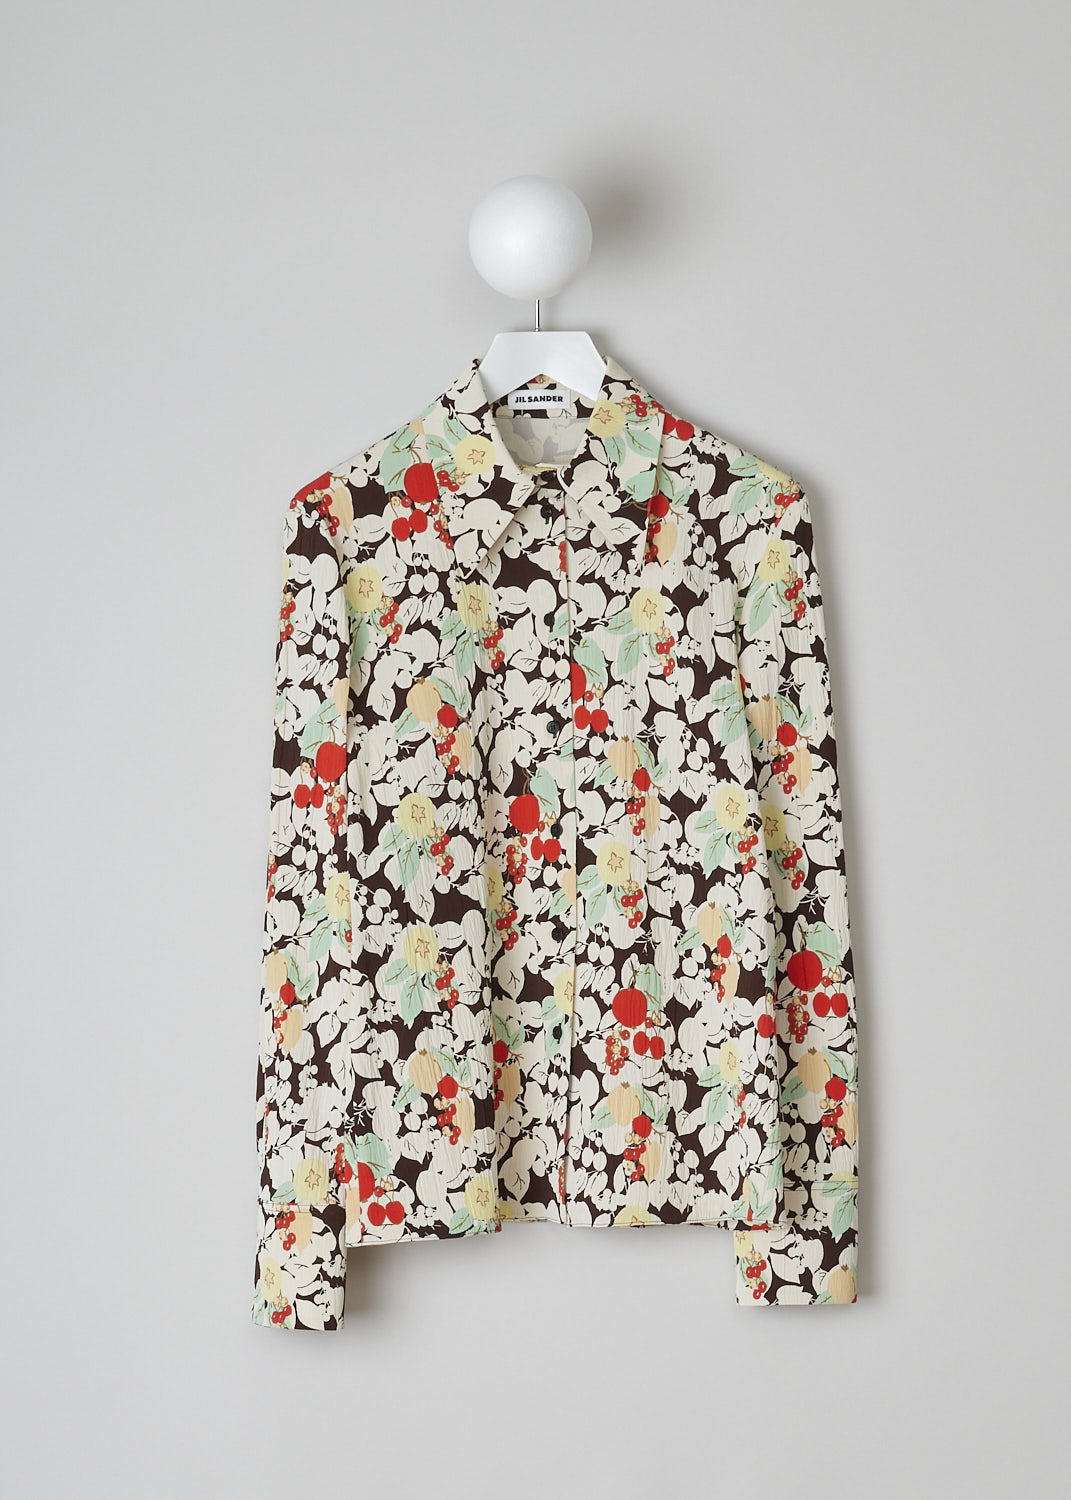 JIL SANDER, MULTICOLOR FRUIT PRINT BLOUSE, J01DL0009_J65010_972, Print, Red, Green, Front, This blouse has a multicolor fruit print. The blouse has a spread collar and a front button closure. The long sleeves have buttoned cuffs. The blouse has a straight hemline.
